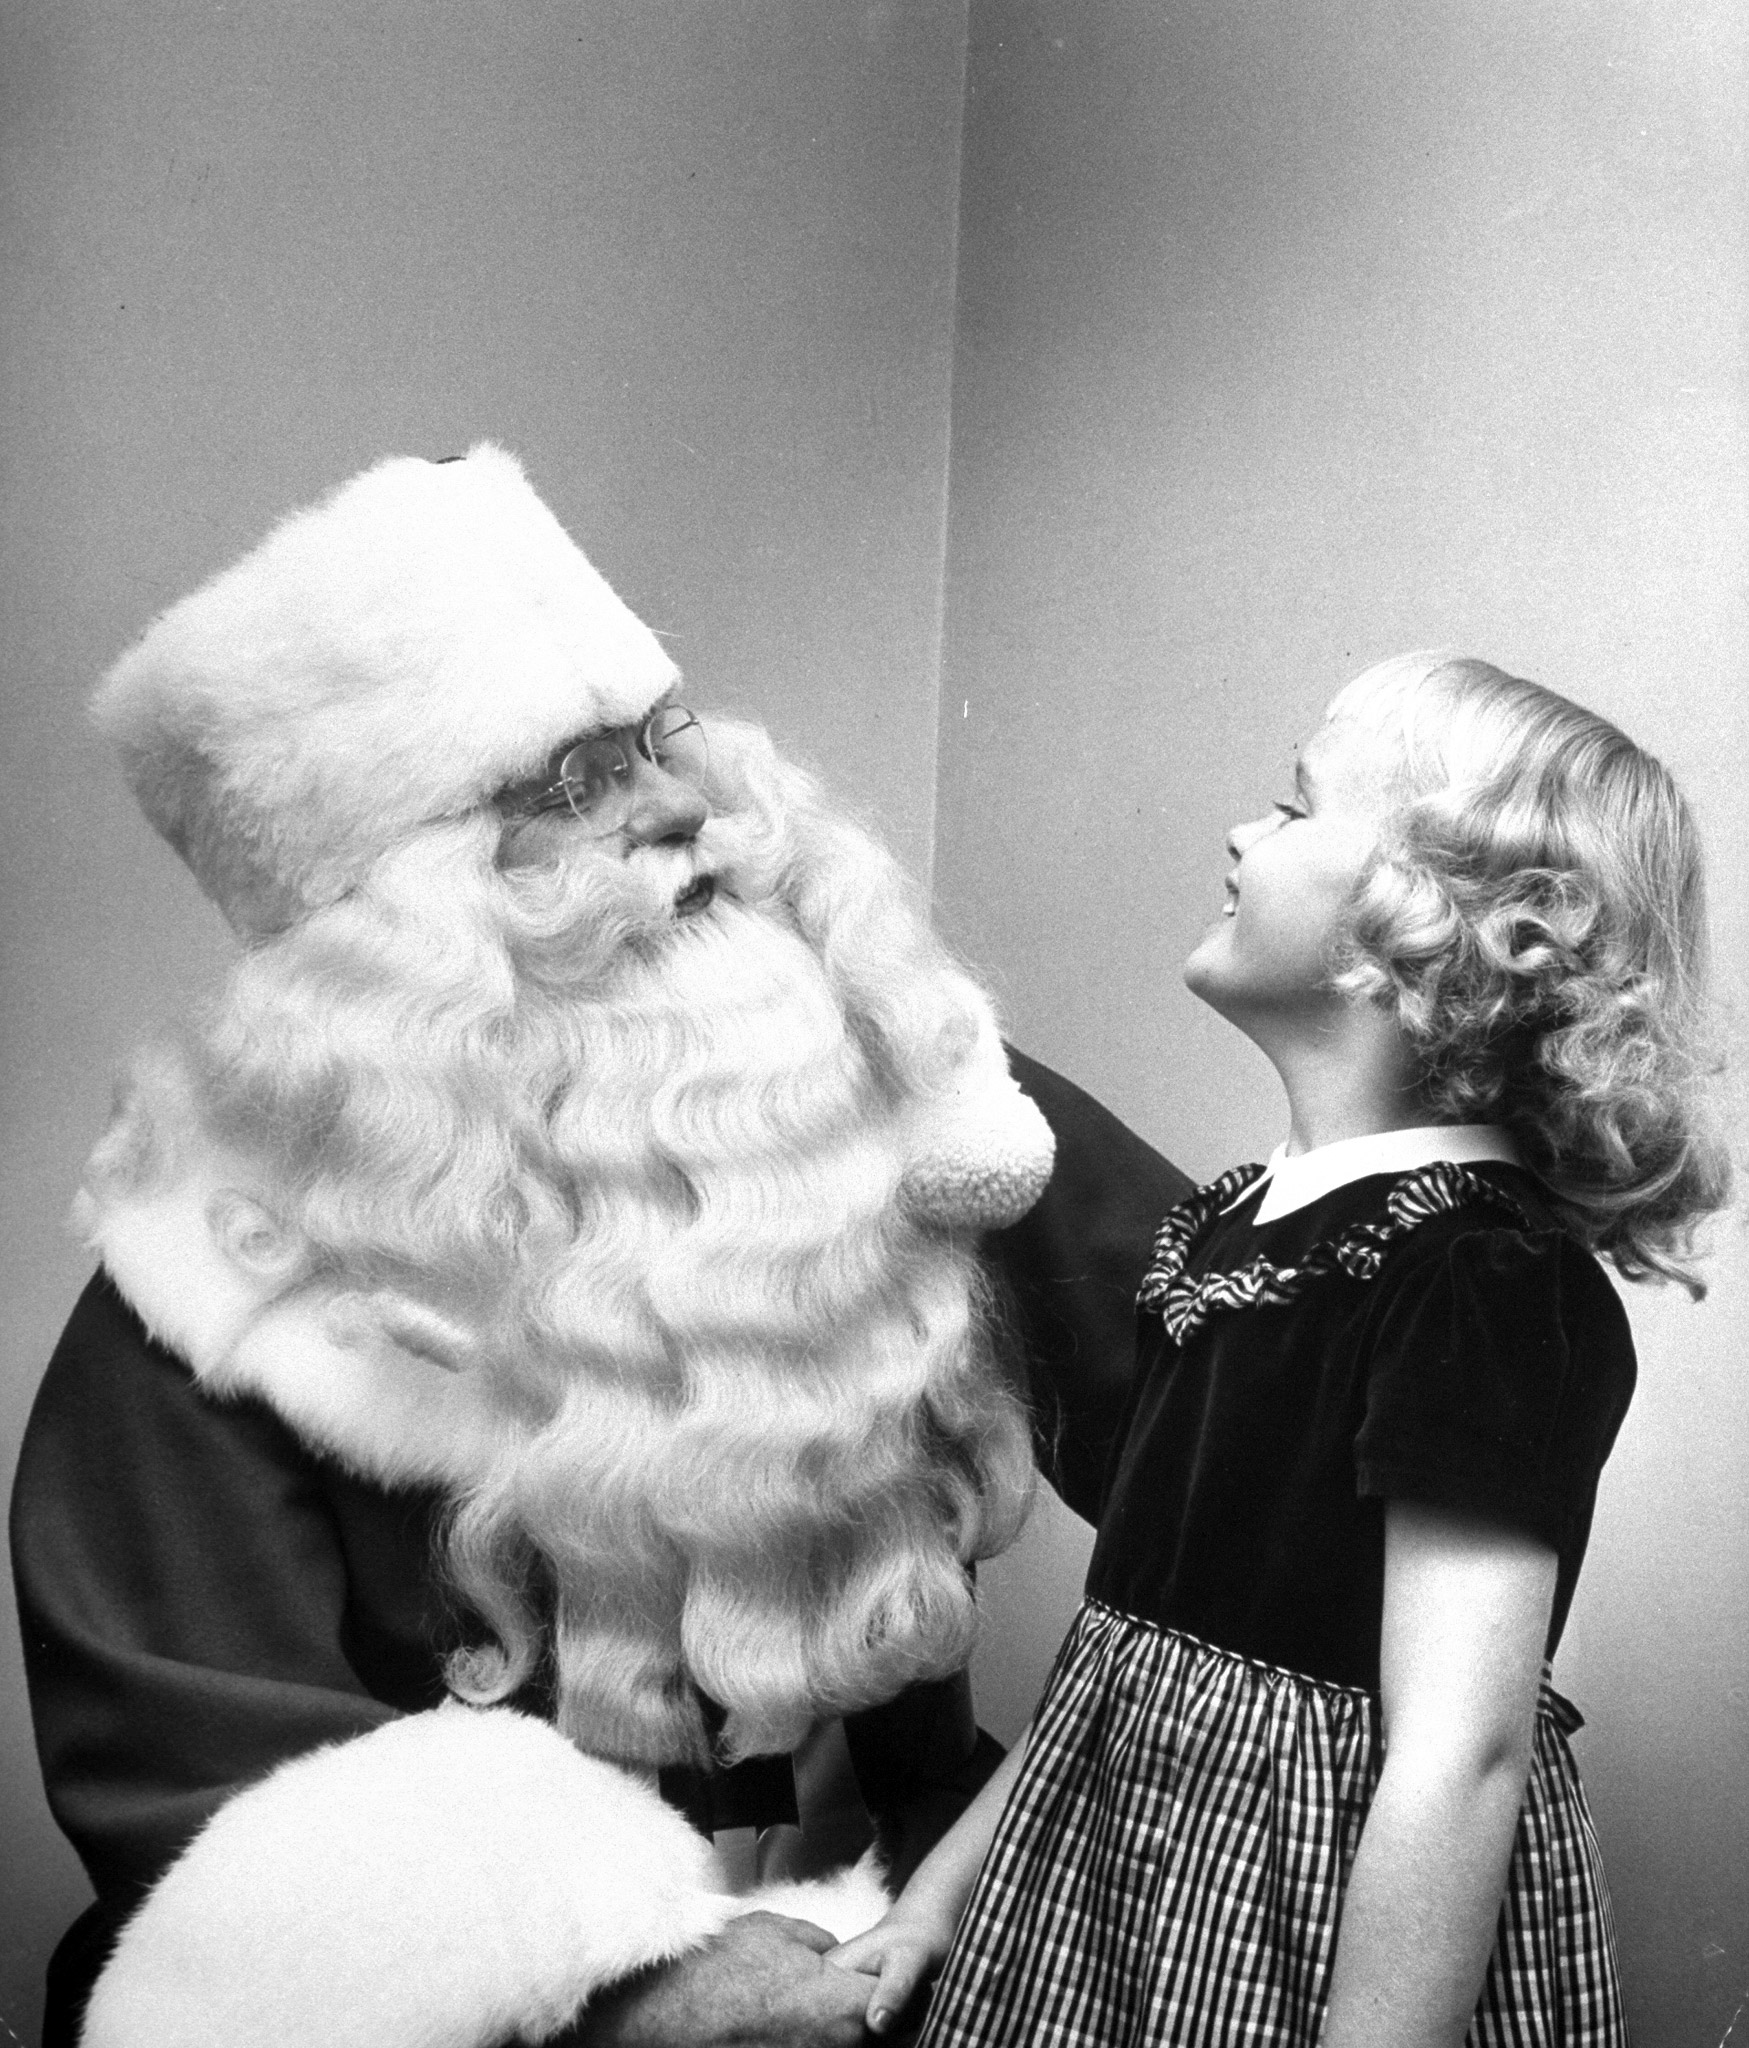 Santa Claus with a young girl, 1948.